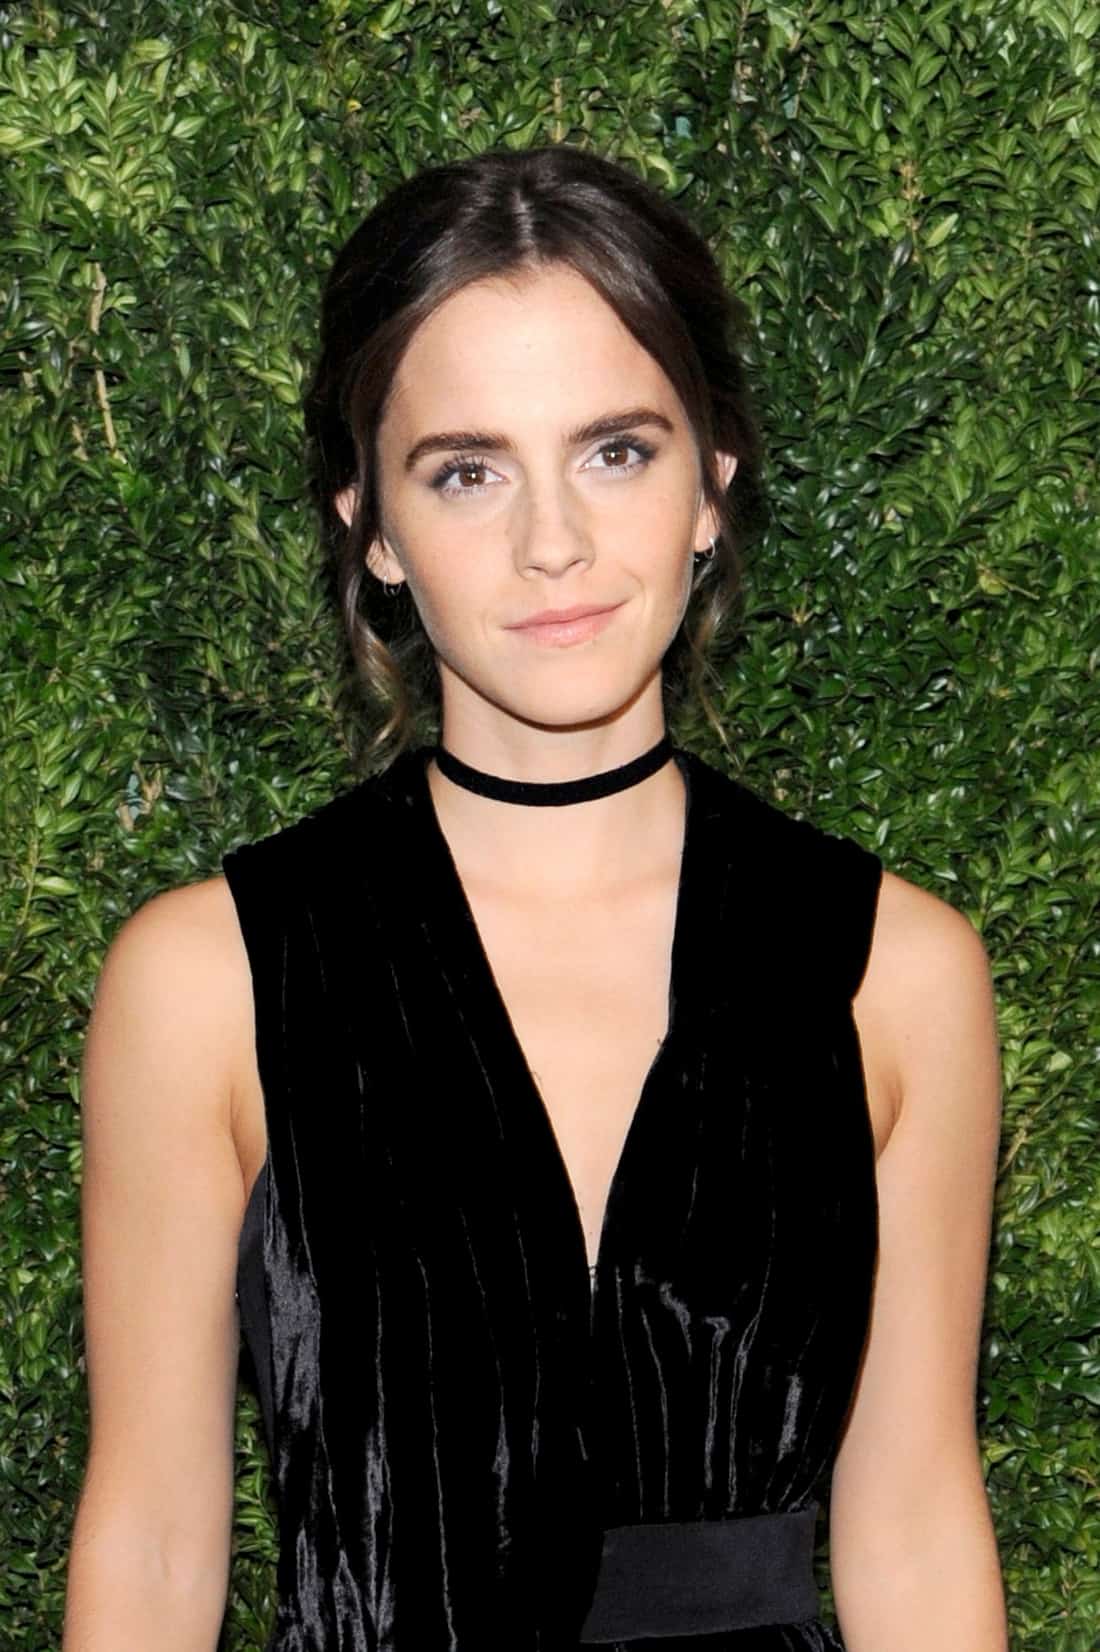 Emma Watson Stuns in a Chic Black Velvet Dress at the Benefit Gala in NYC